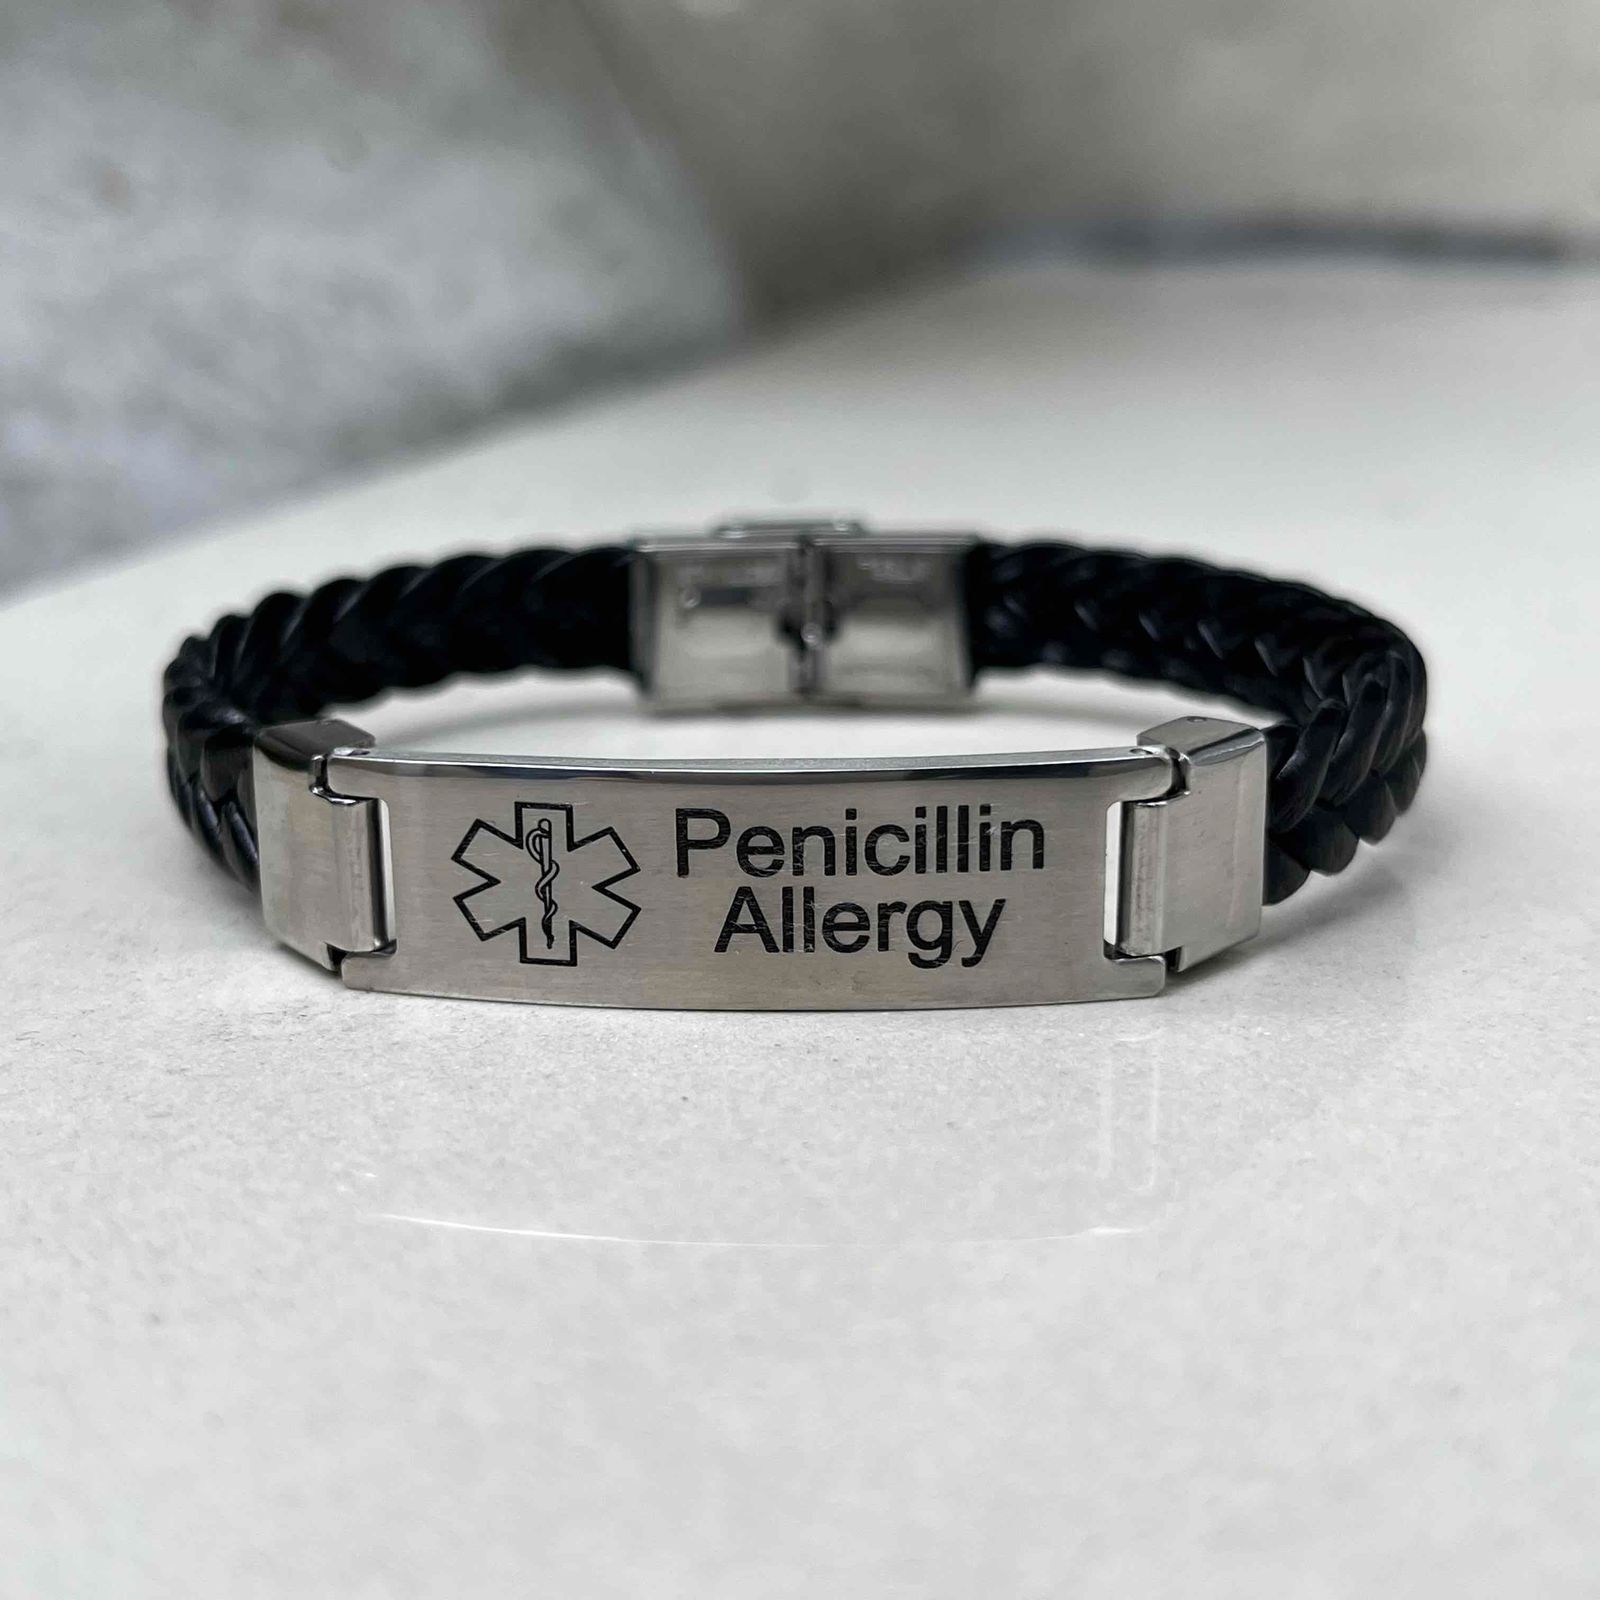 Penicillin Allergy Bracelet, Easy to Identify, Highly Polished Stainless  Steel - Walmart.com